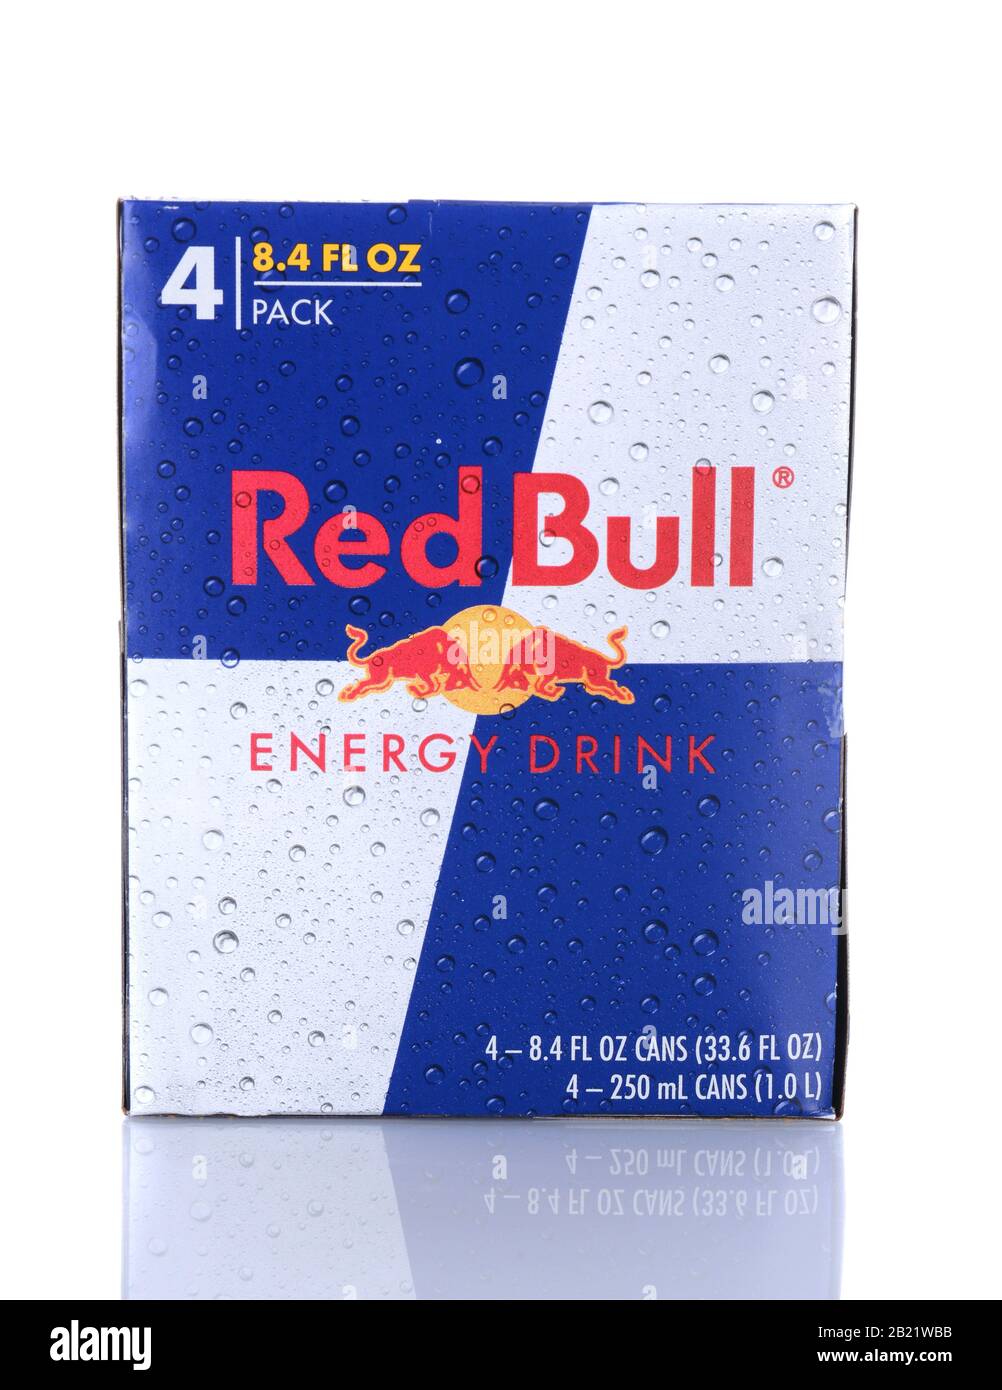 IRVINE, CA - February 06, 2014: A Four Pack of Red Bull Energy Drinks. Red Bull is the most popular energy drink in the world, with 5.2 billion cans s Stock Photo